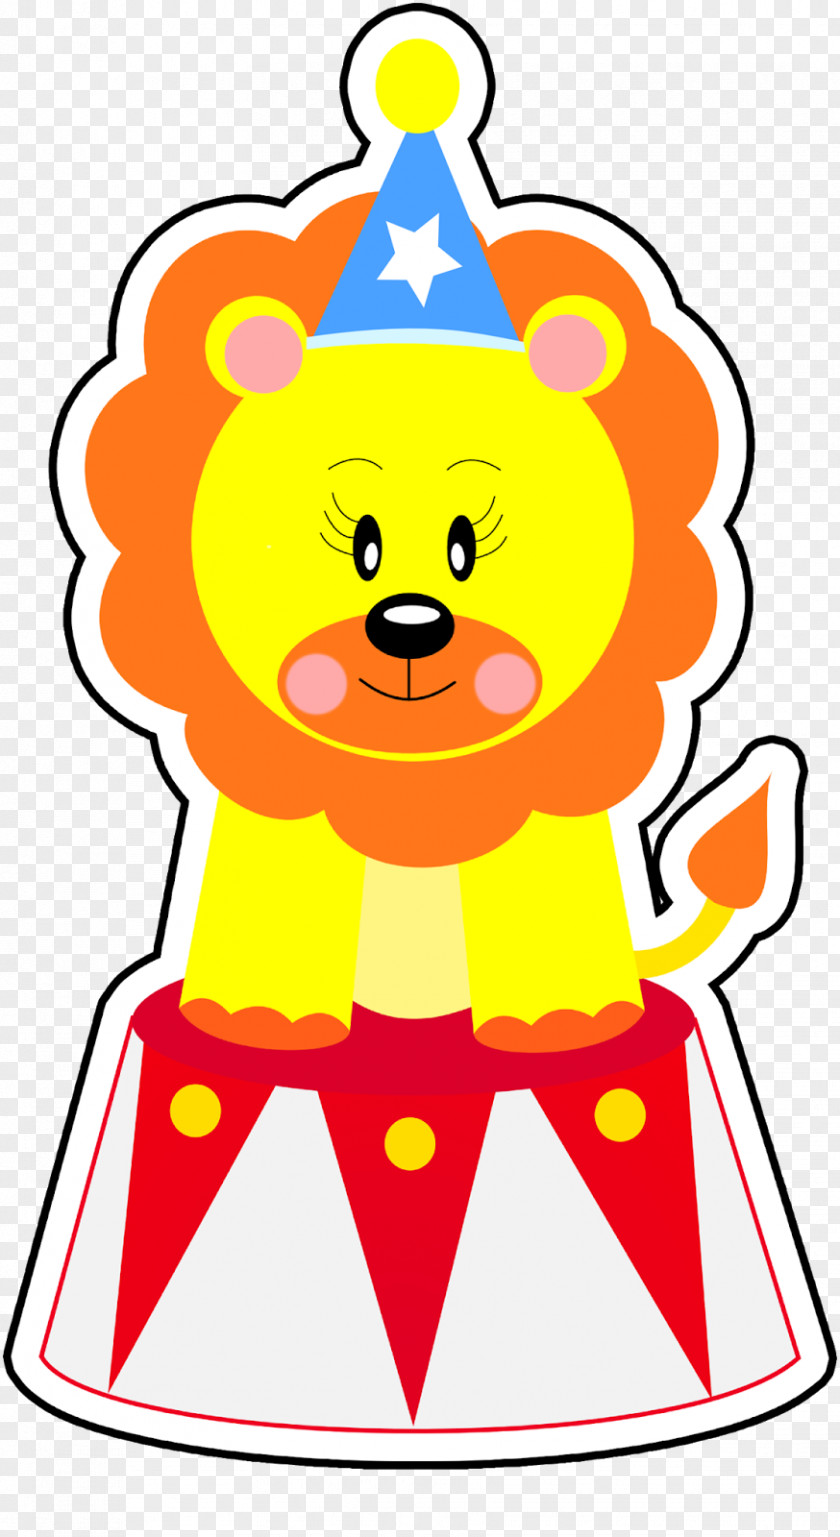 Circus Lion Clown Drawing Image PNG